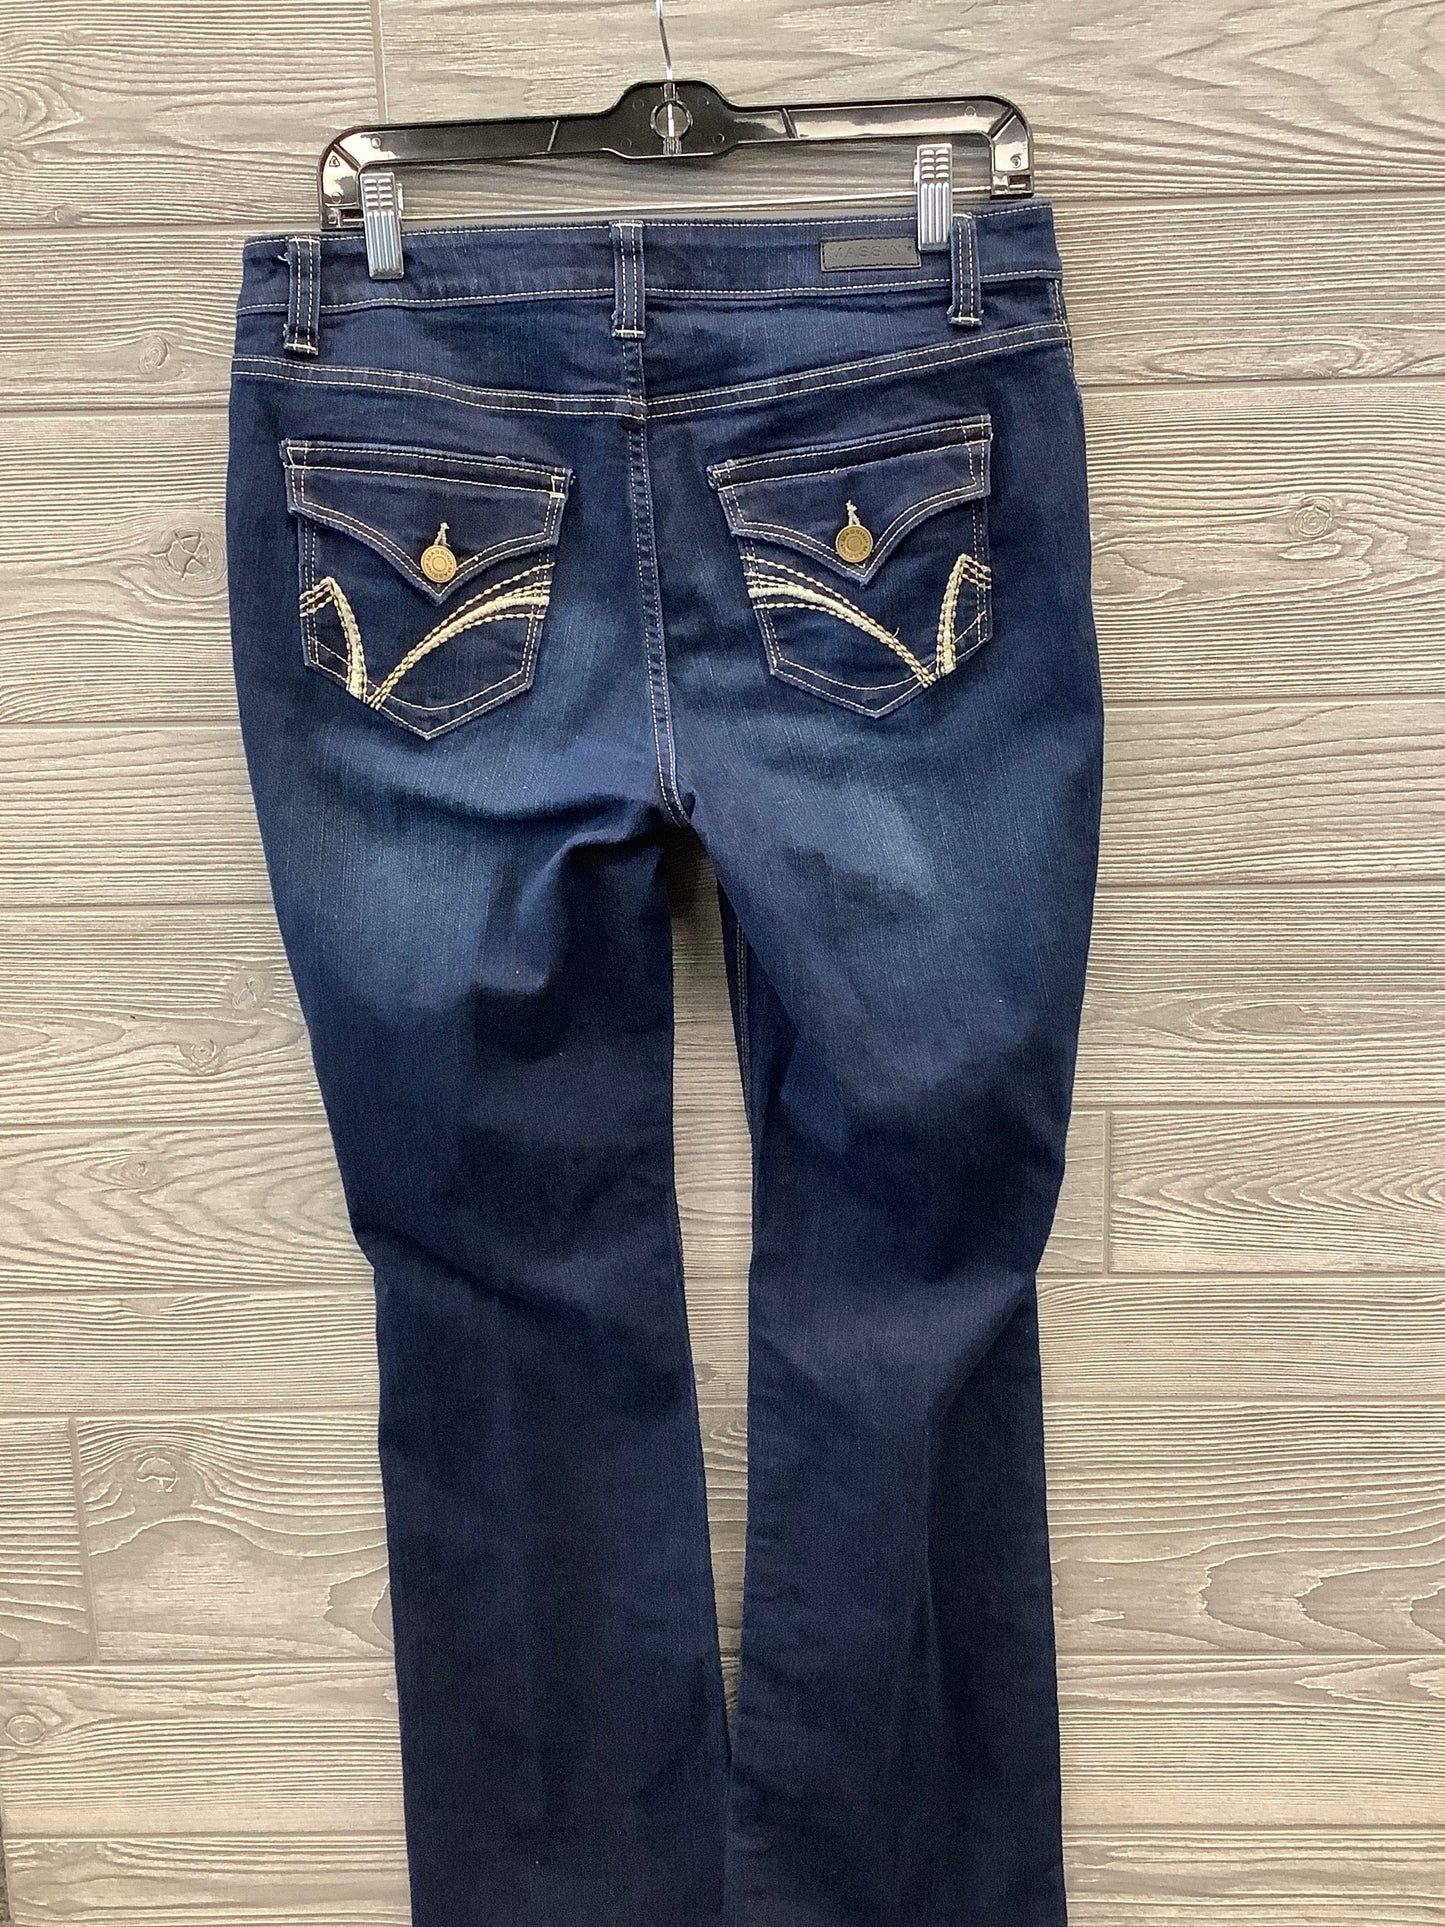 Jeans Boot Cut By Massini  Size: 10